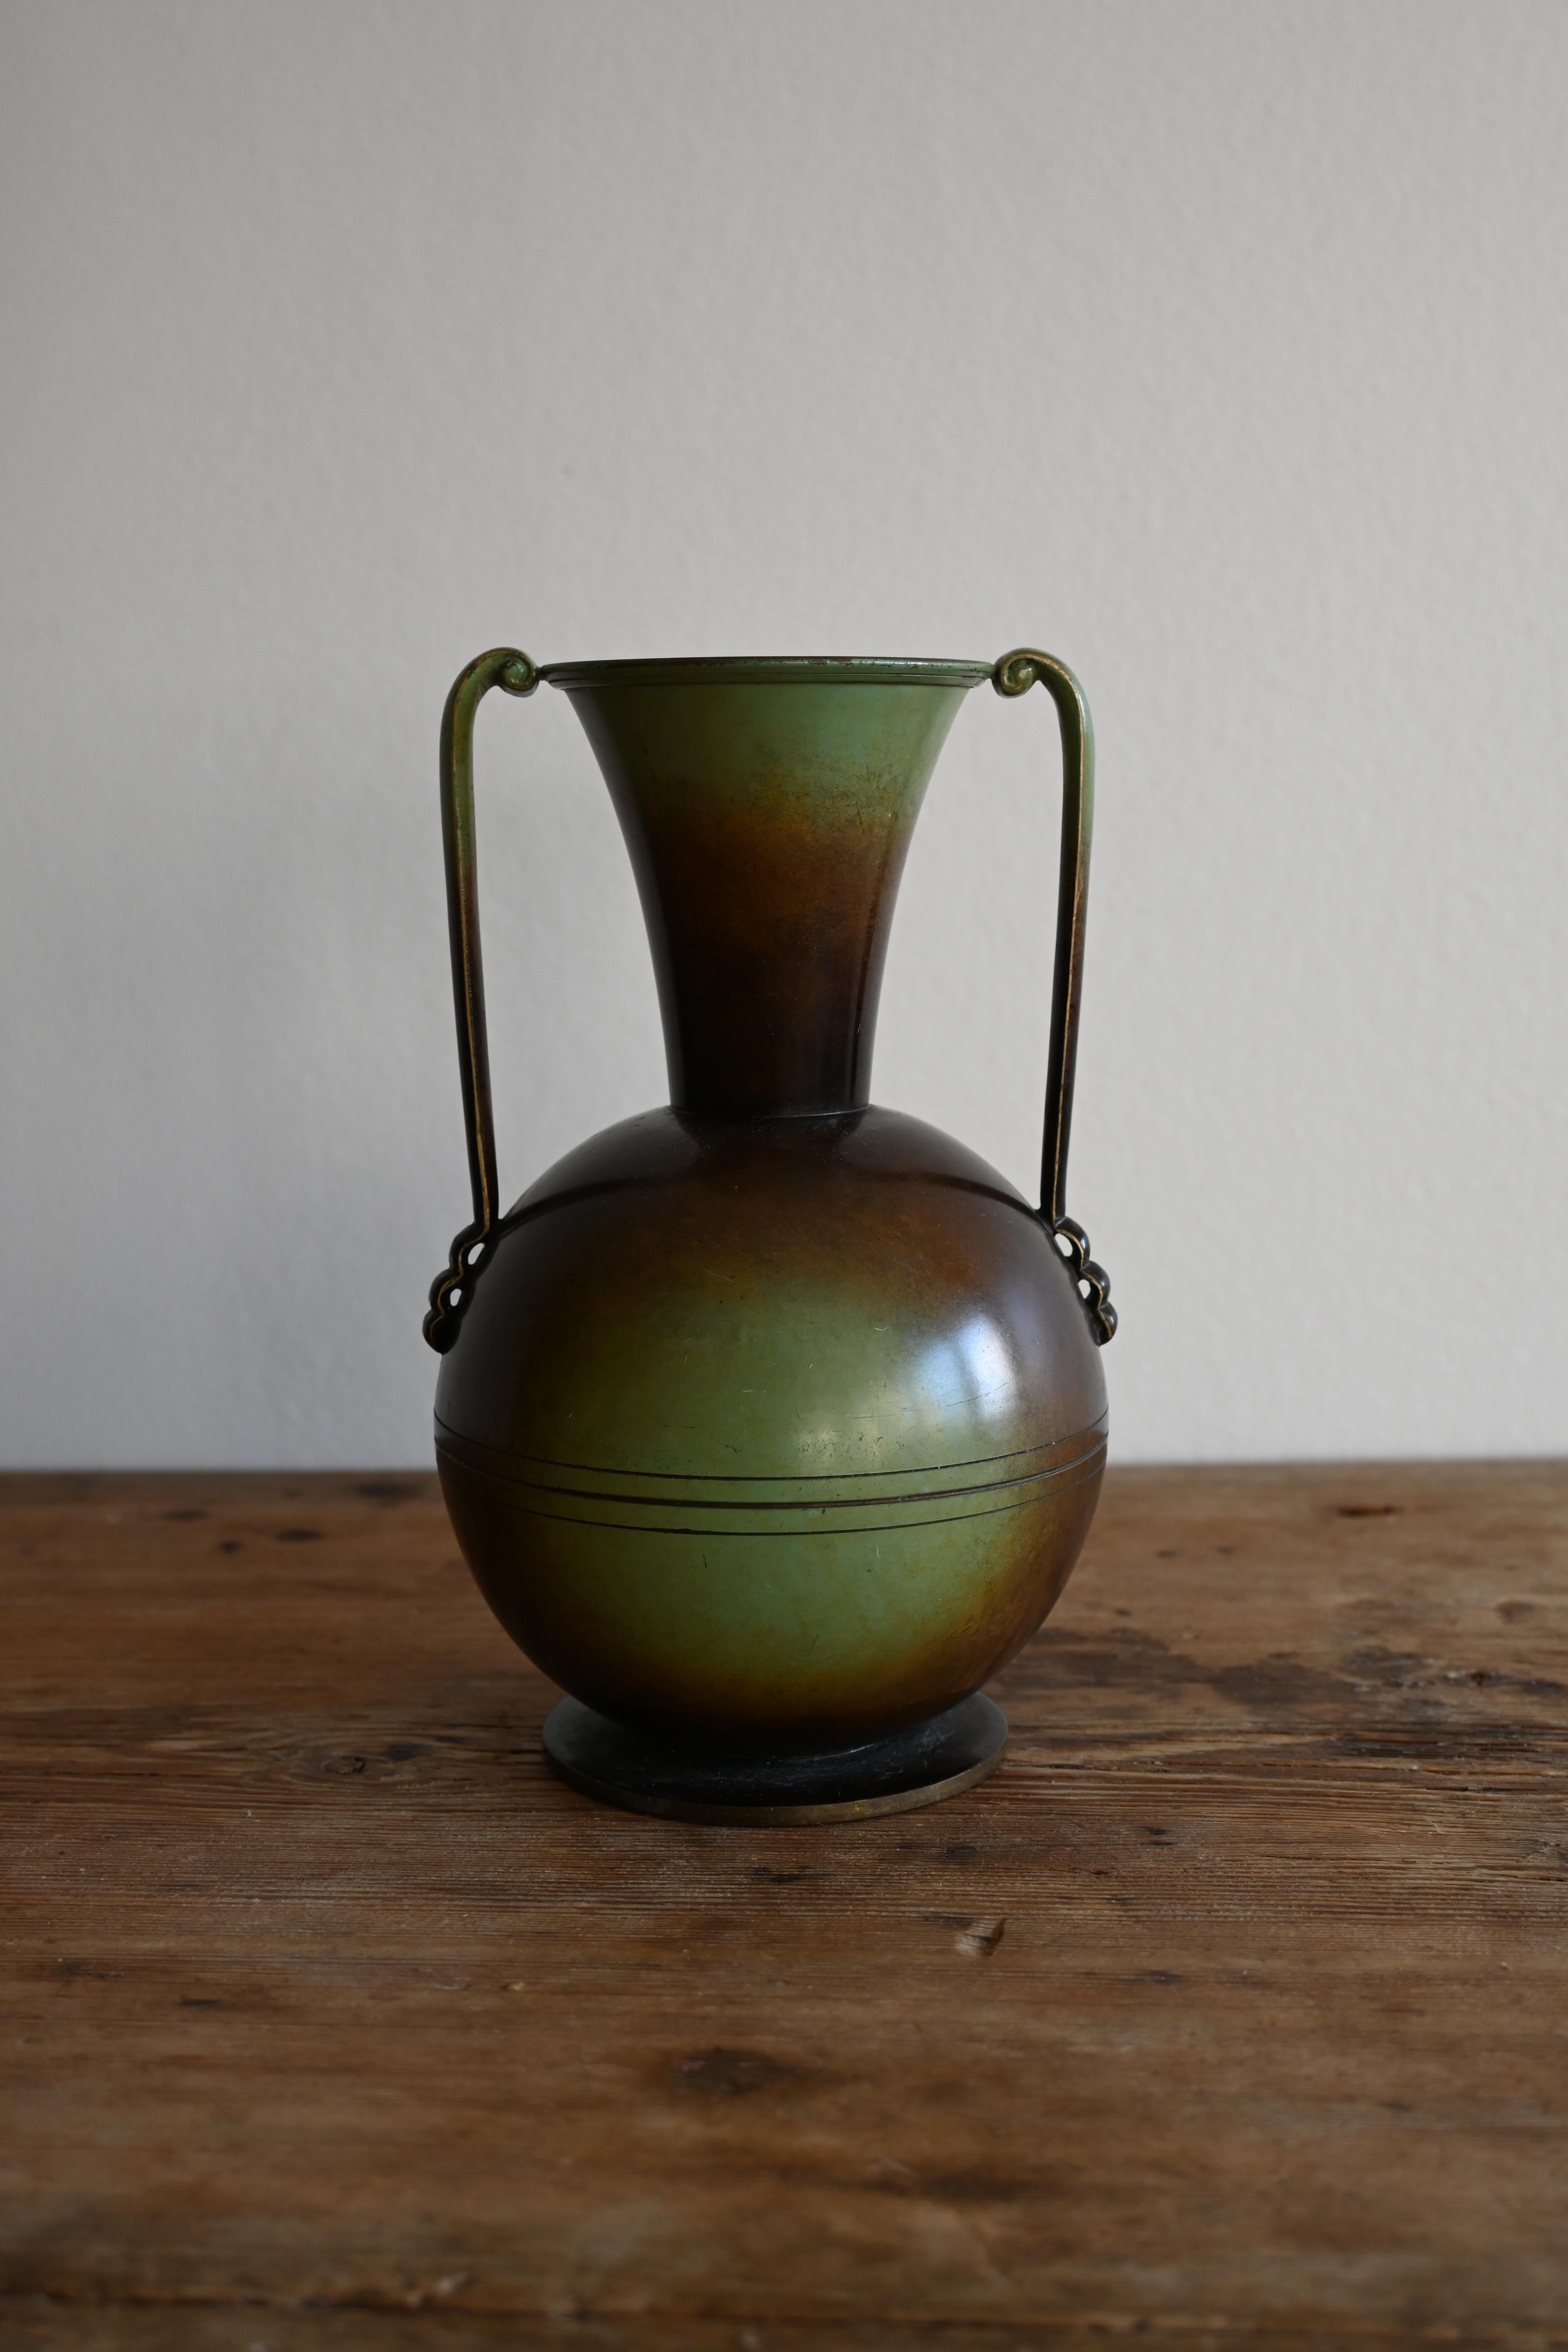 Beautiful Patinated bronze Vase by Ystad Brons, Sweden, from the 1940s. 

Elegant patinated bronze vase with handles marked 